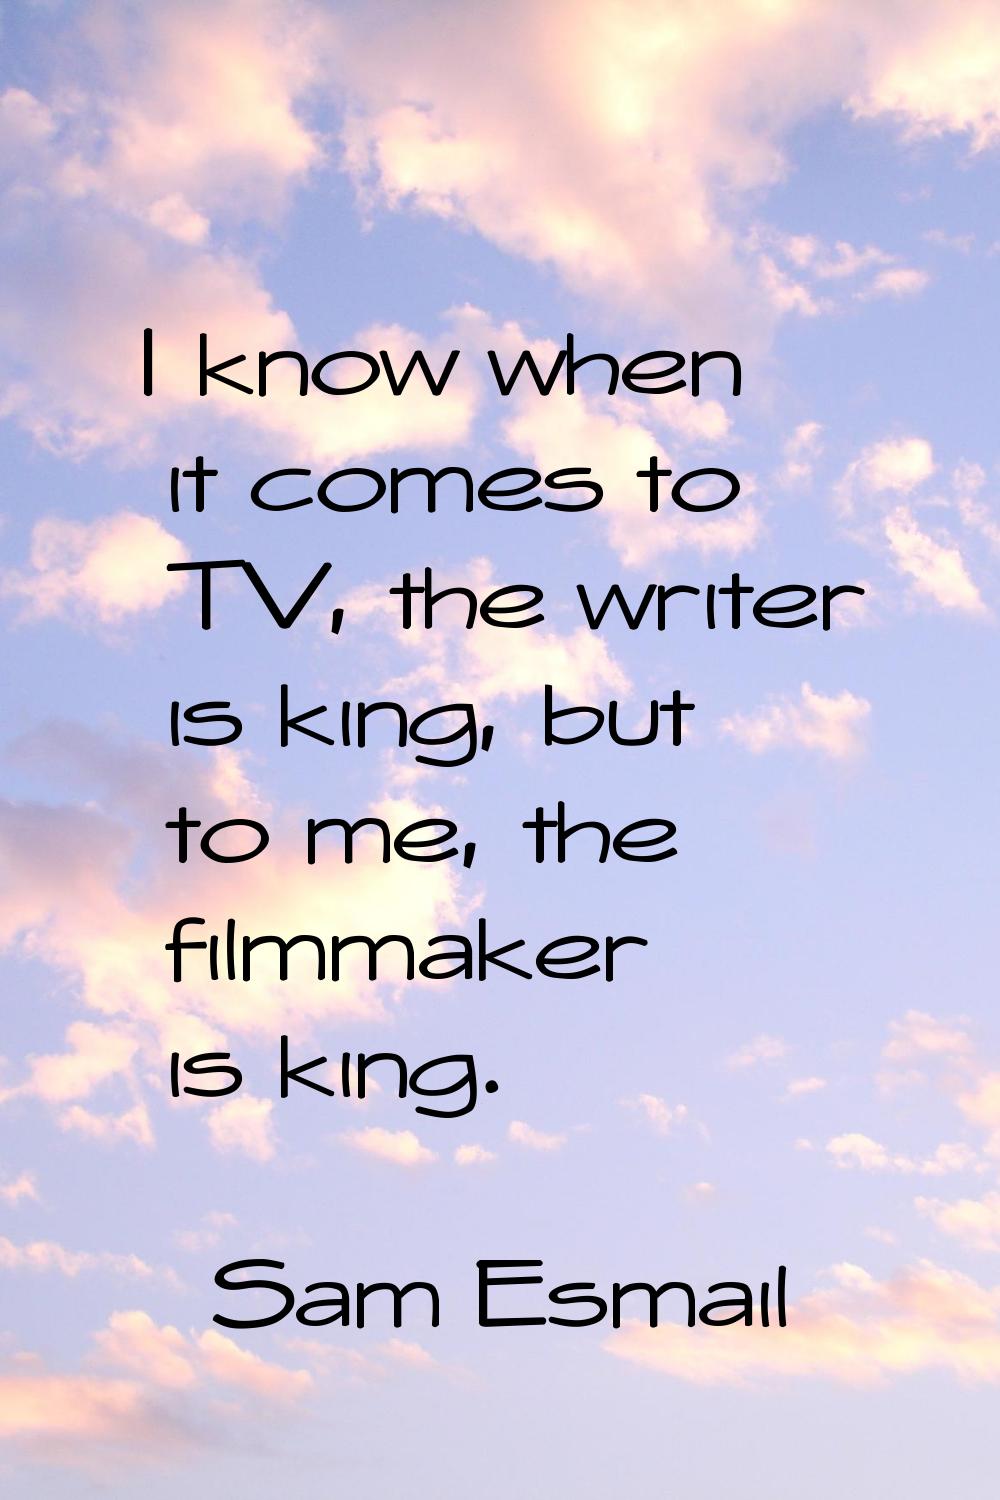 I know when it comes to TV, the writer is king, but to me, the filmmaker is king.